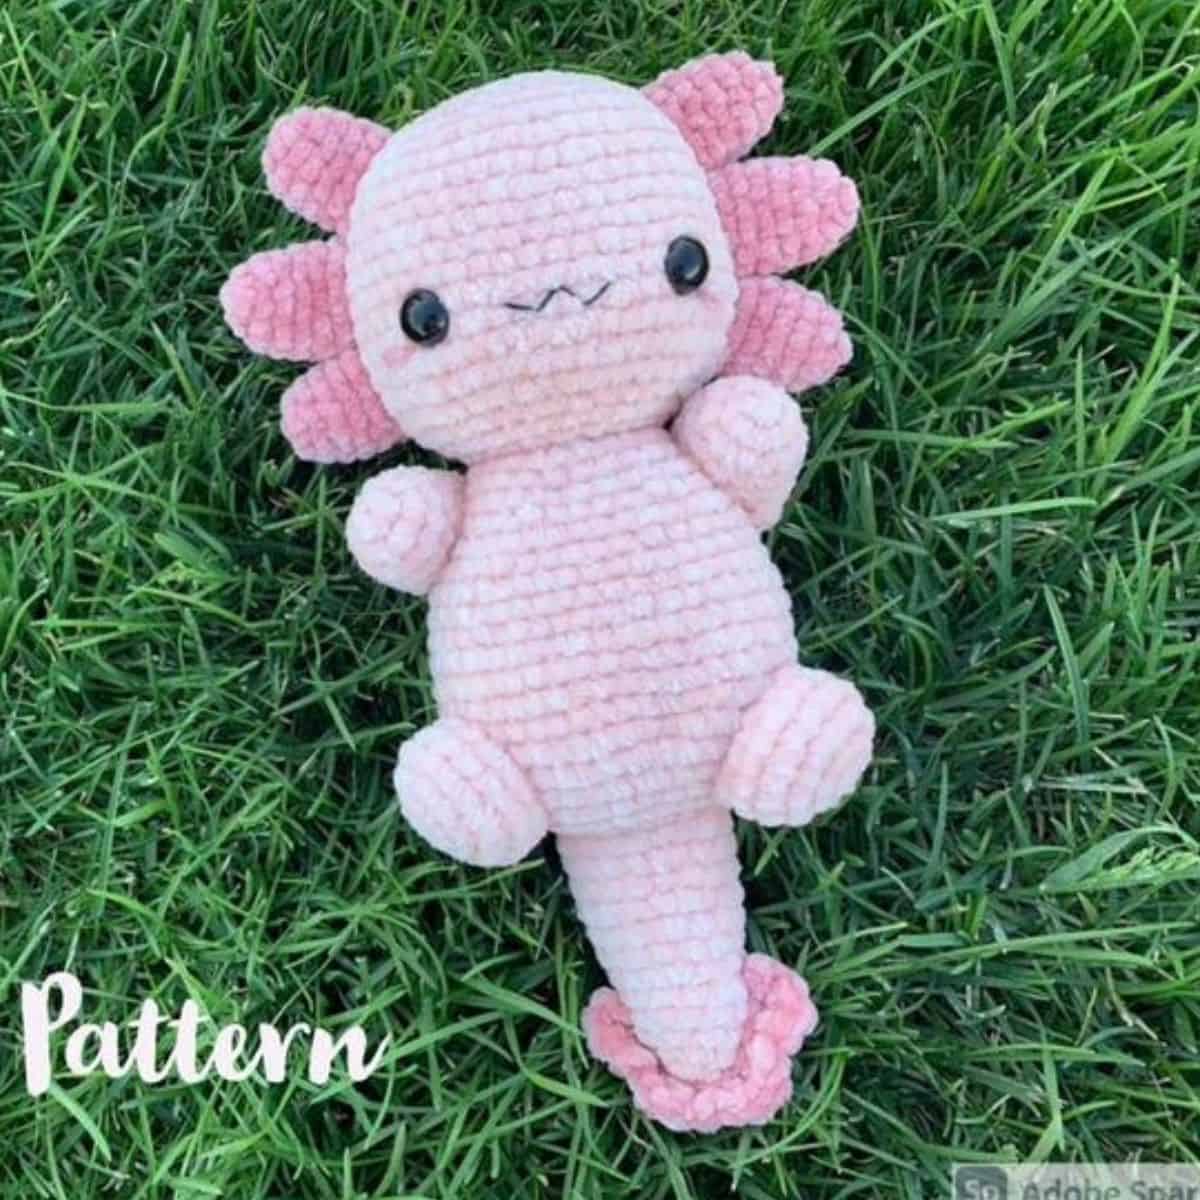 pink crochet axolotl plushie laying on the grass